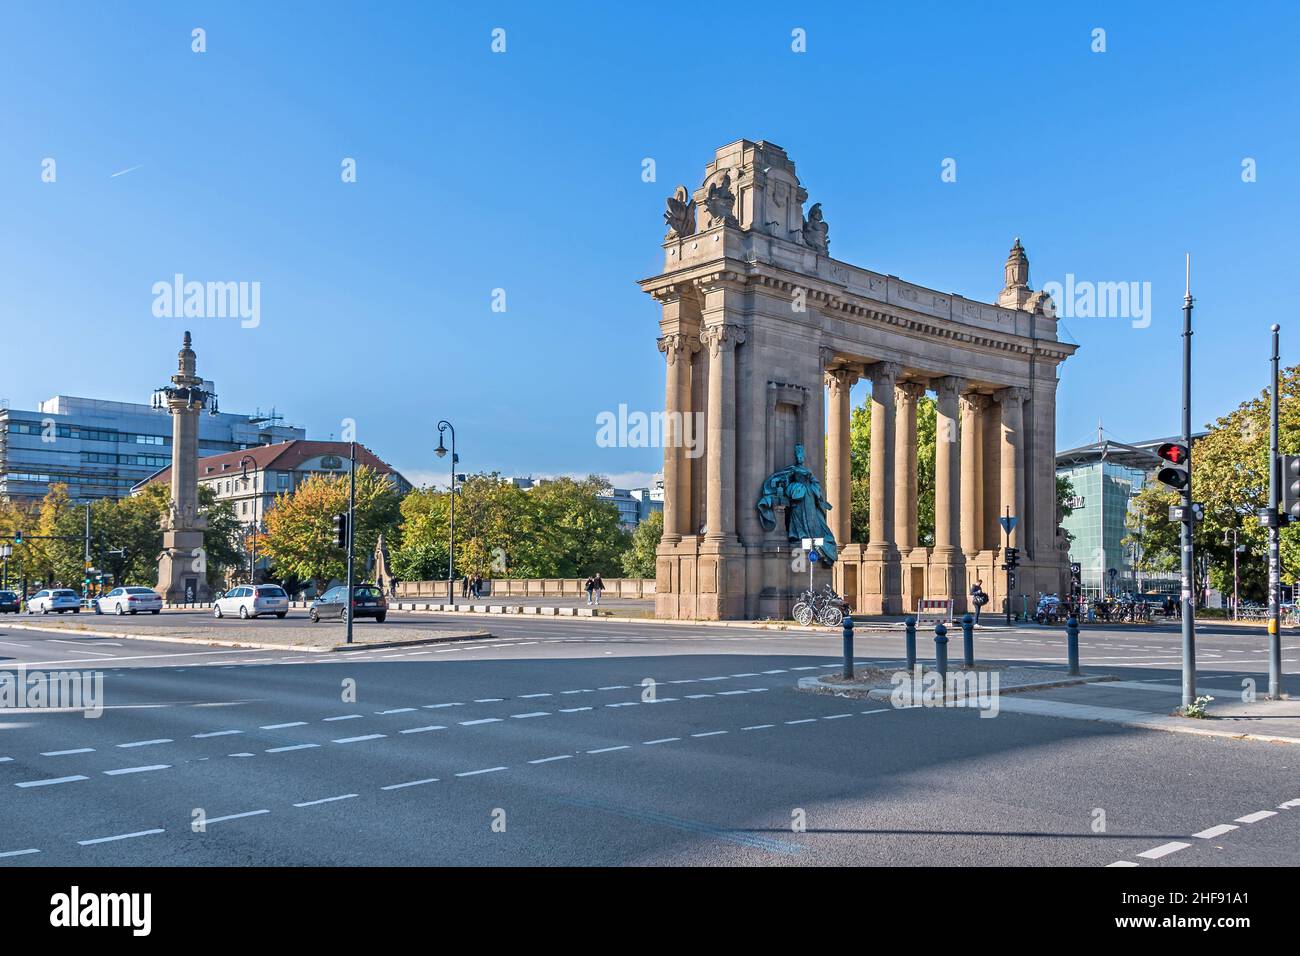 Berlin, Germany - October 10, 2021: One of two Porticoes of the Charlottenburg Gate and candelabra on Strasse des 17. Juni with Charlottenburg Bridge Stock Photo